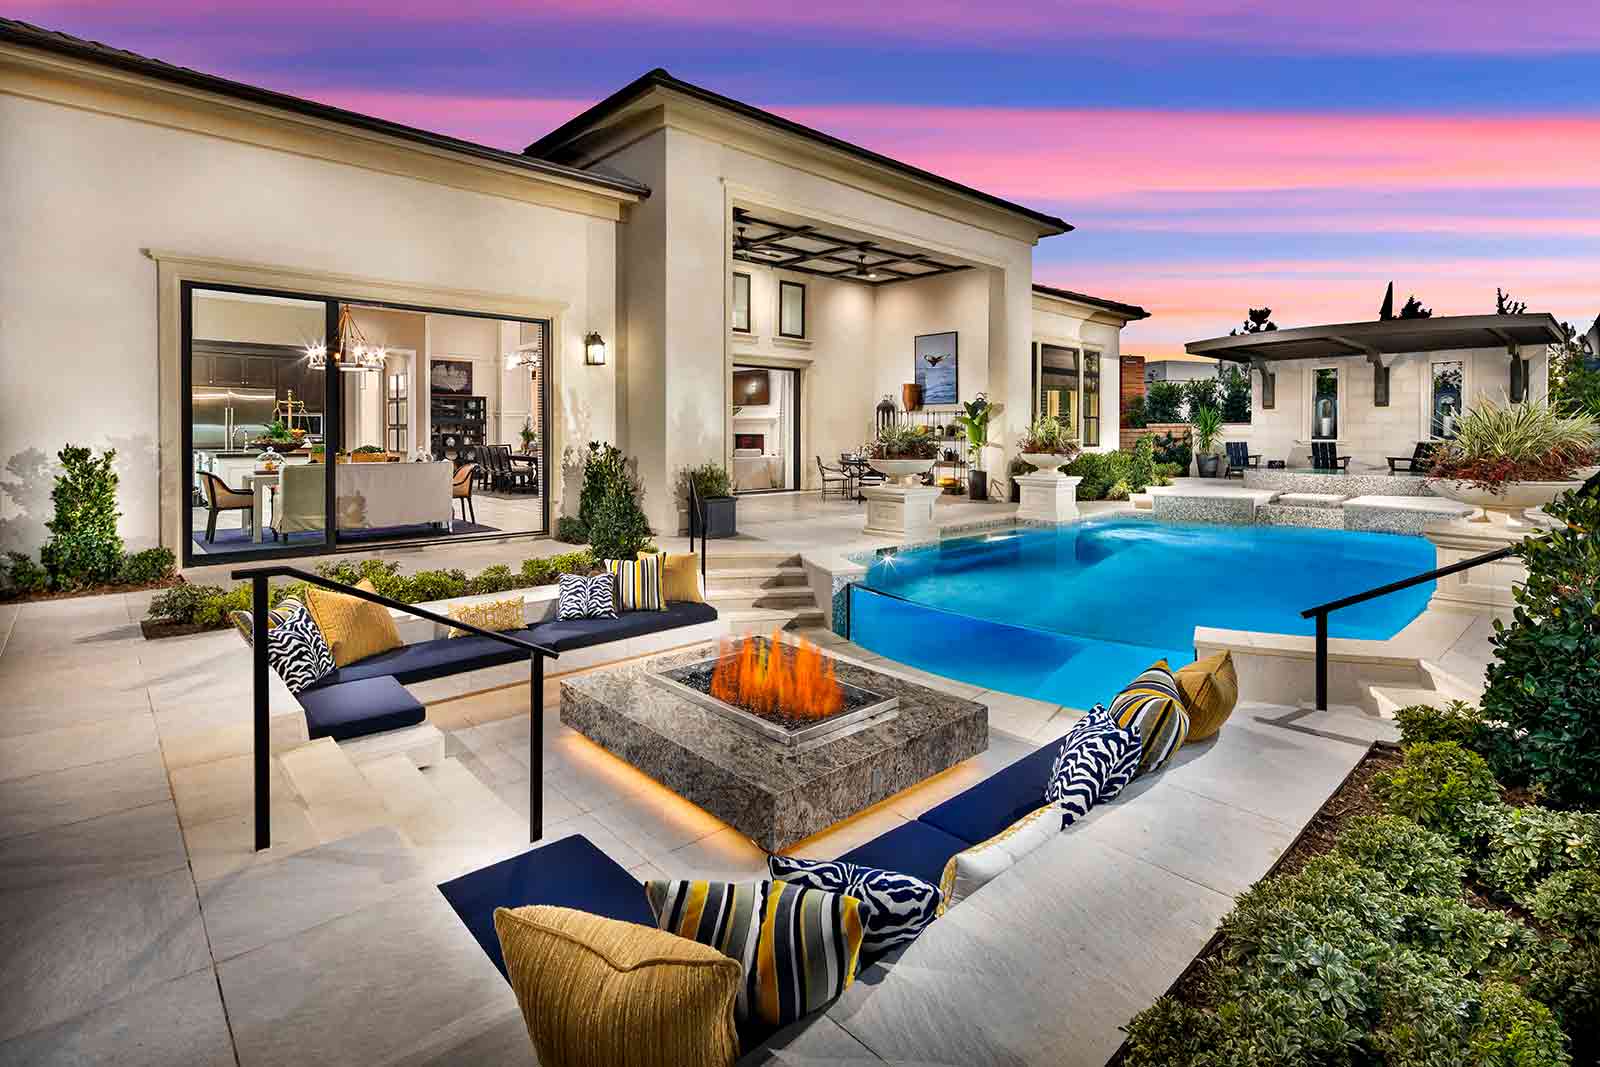 What Swimming Pool Design is Best for your Backyard? 1